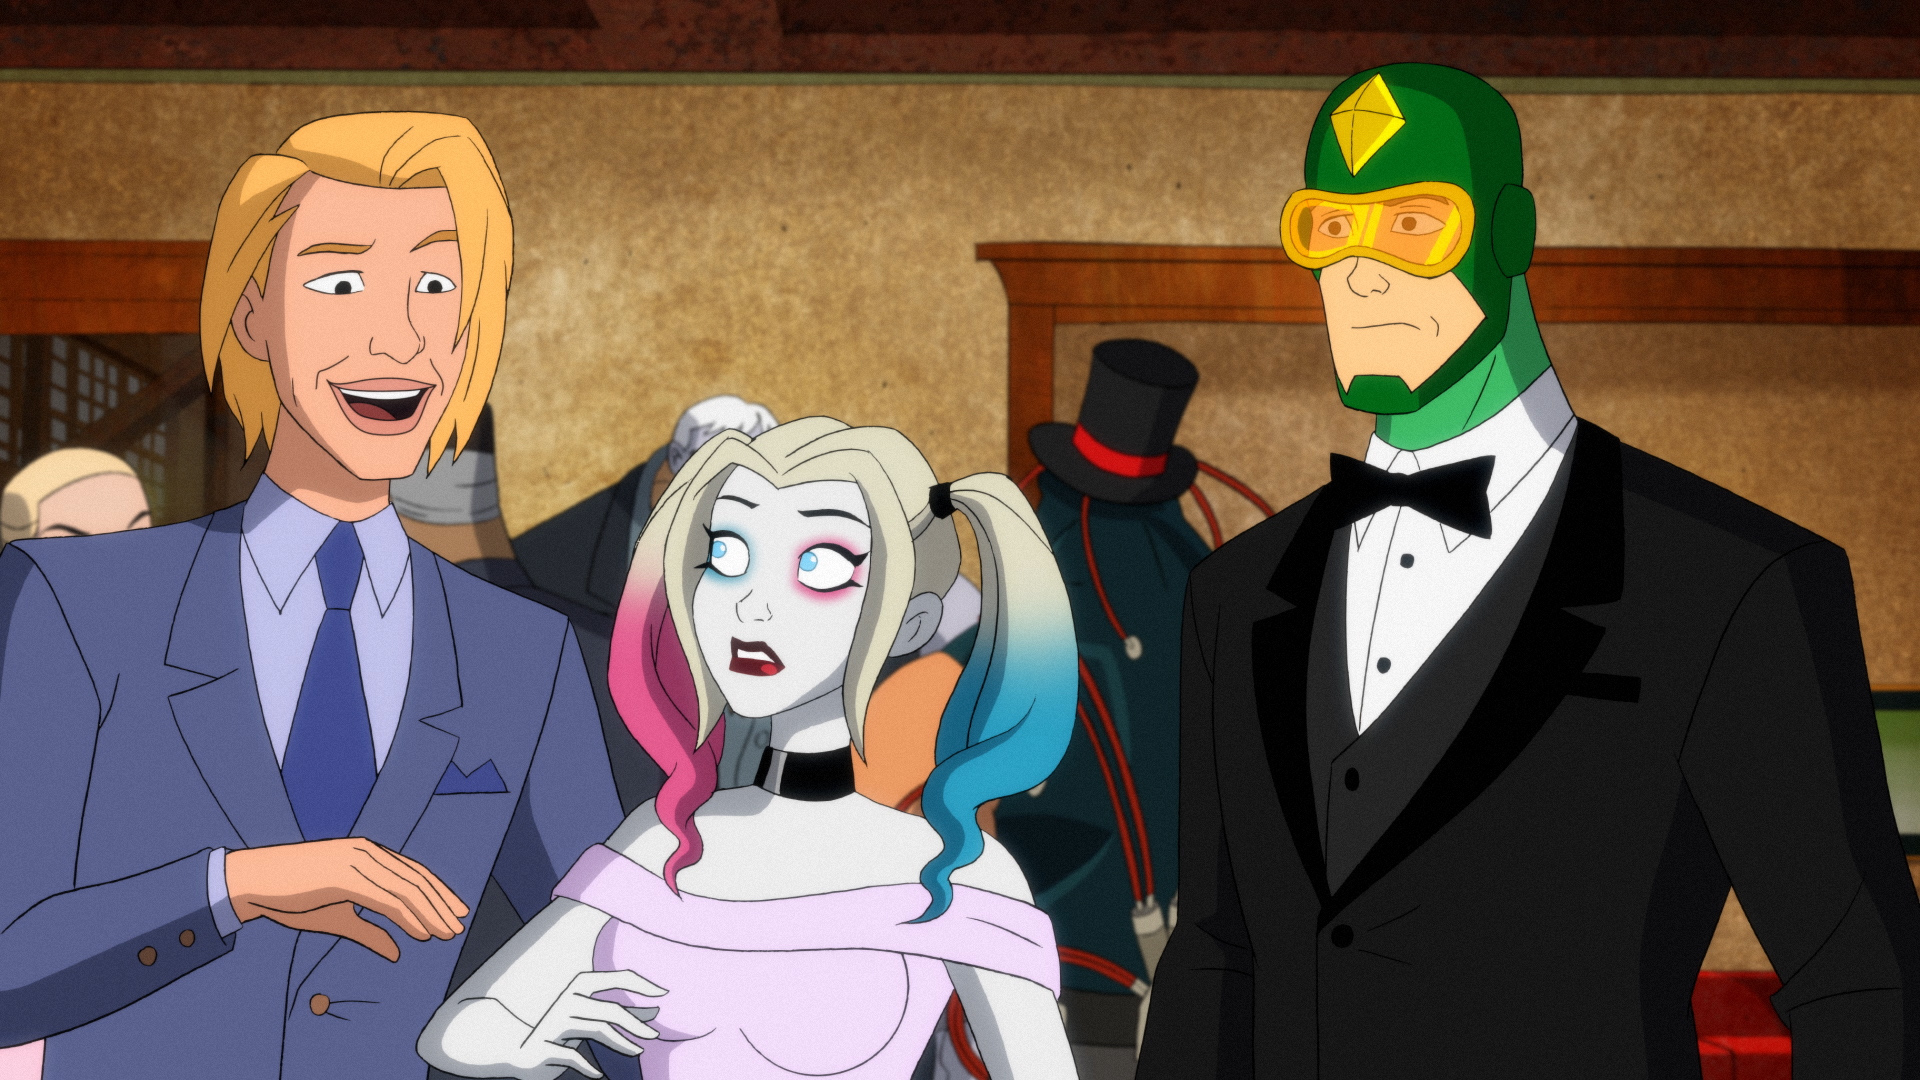 Left to Right: Wedding Photographer, Harley Quinn in a dress, and Kite Man in a tuxedo.